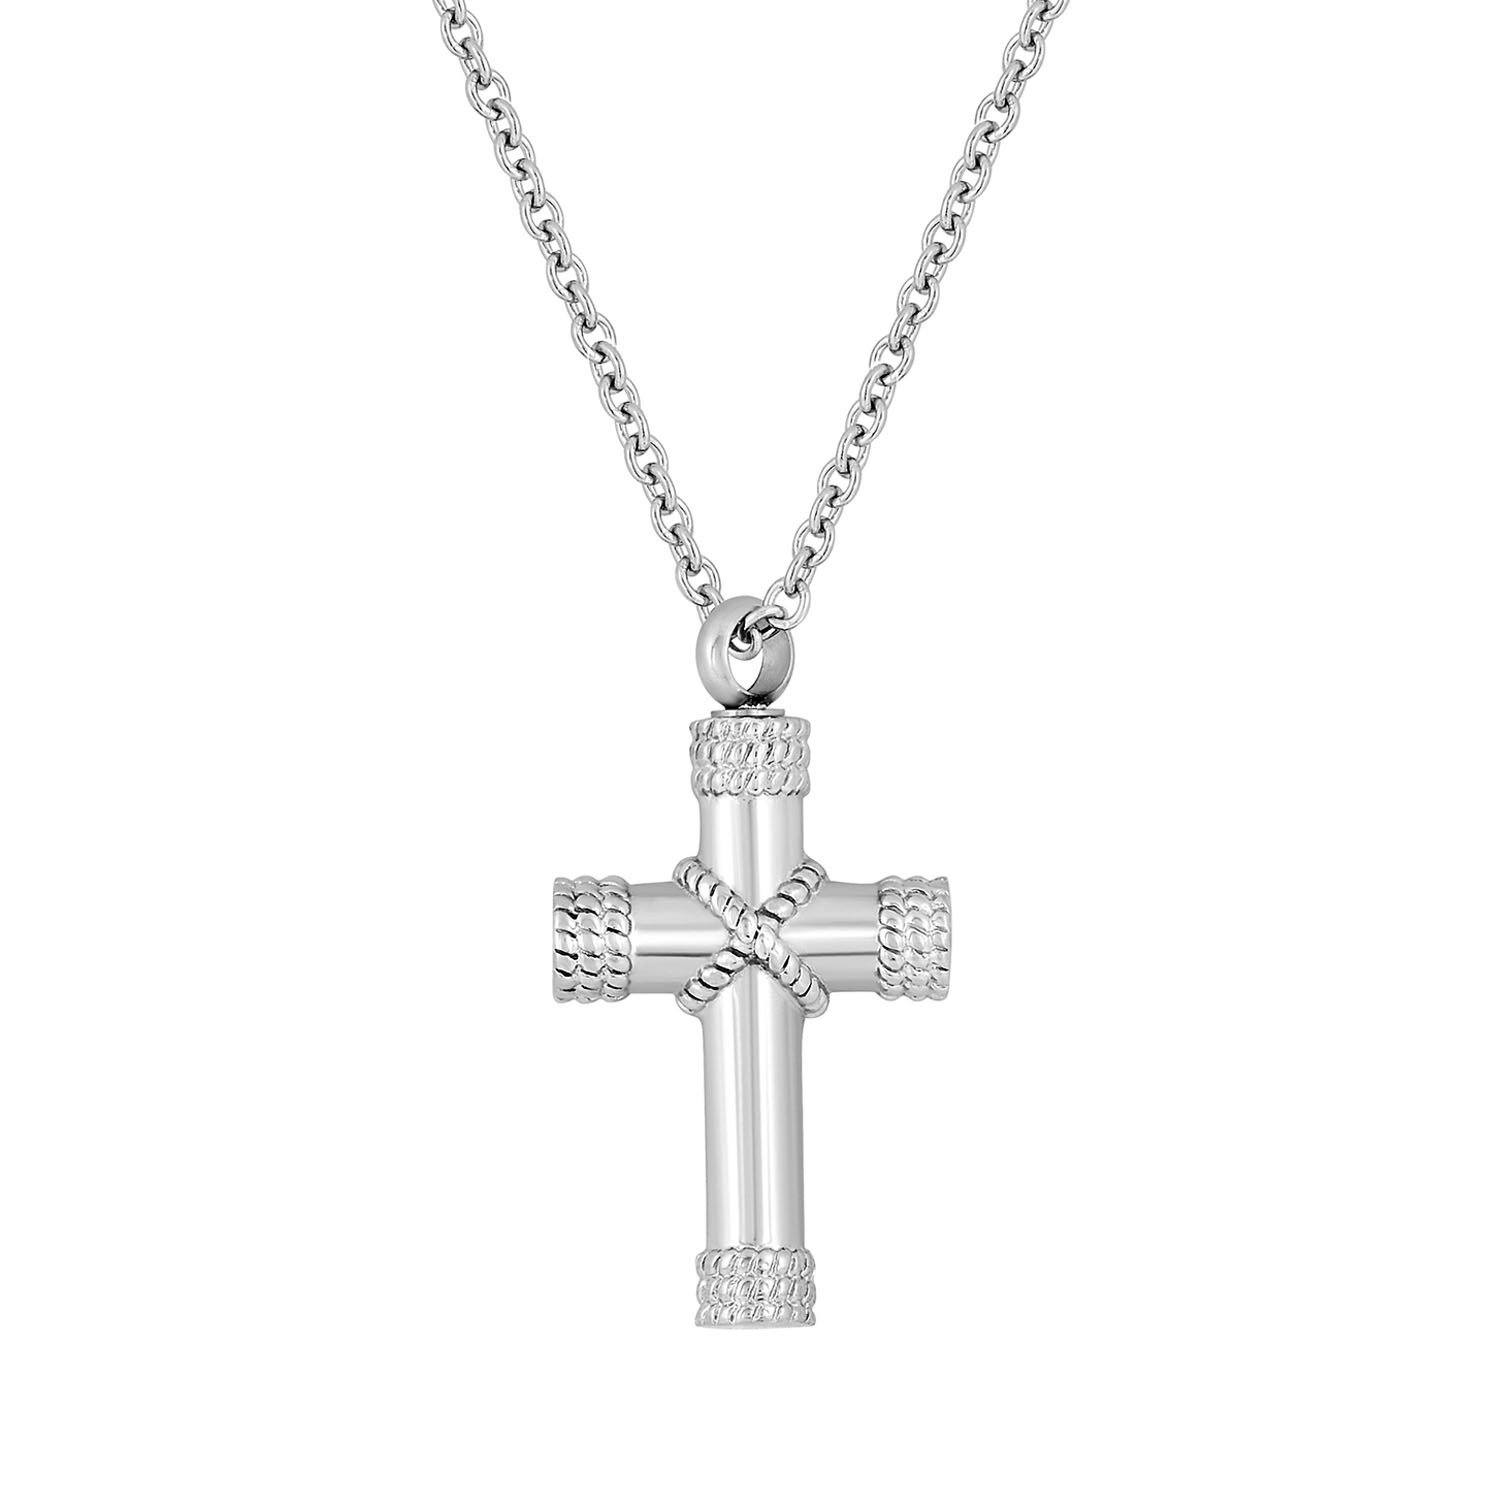 Cremation Jewelry Necklace for Ashes - Cross Necklace